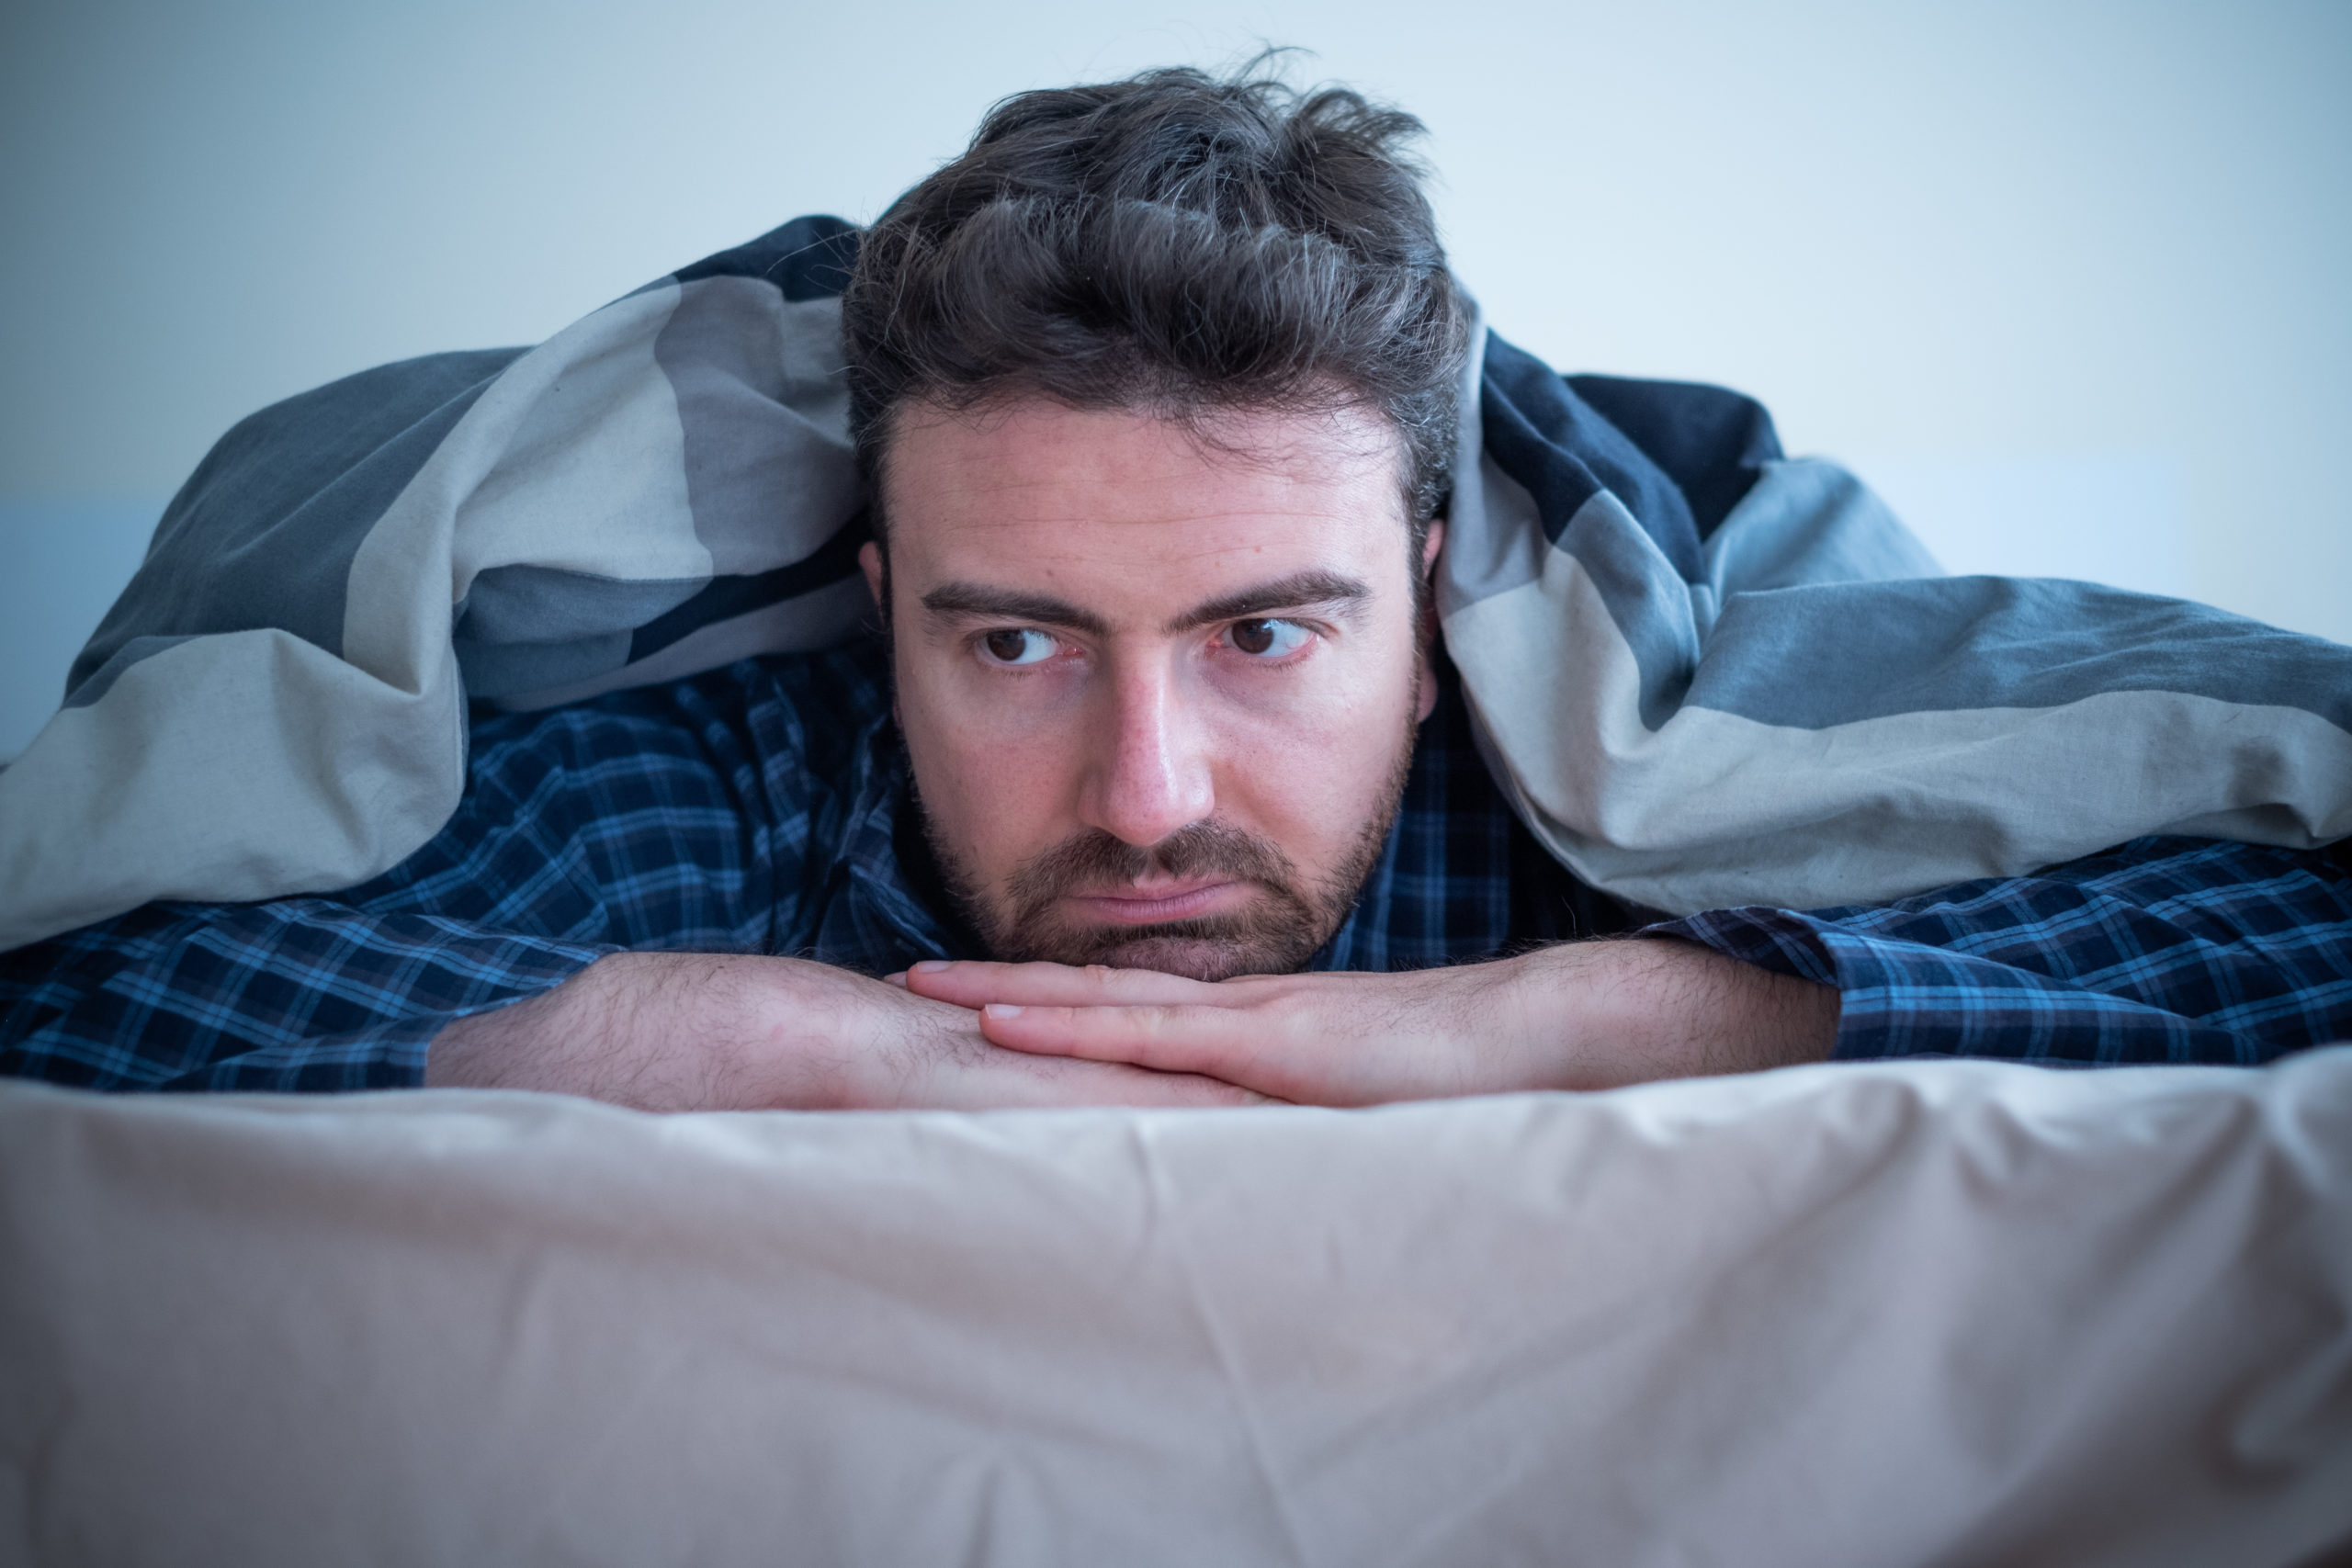 Can Substance-Induced Insomnia Lead to Hallucinations and Psychosis?